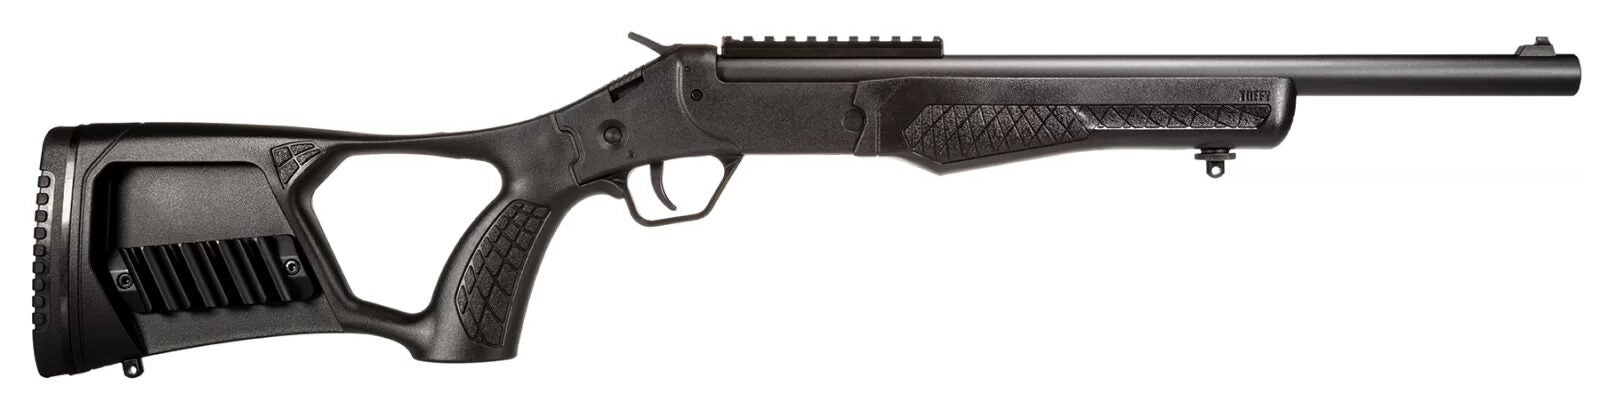 Affordable, Light, Convenient - The New Rossi Poly Tuffy Survival Rifle